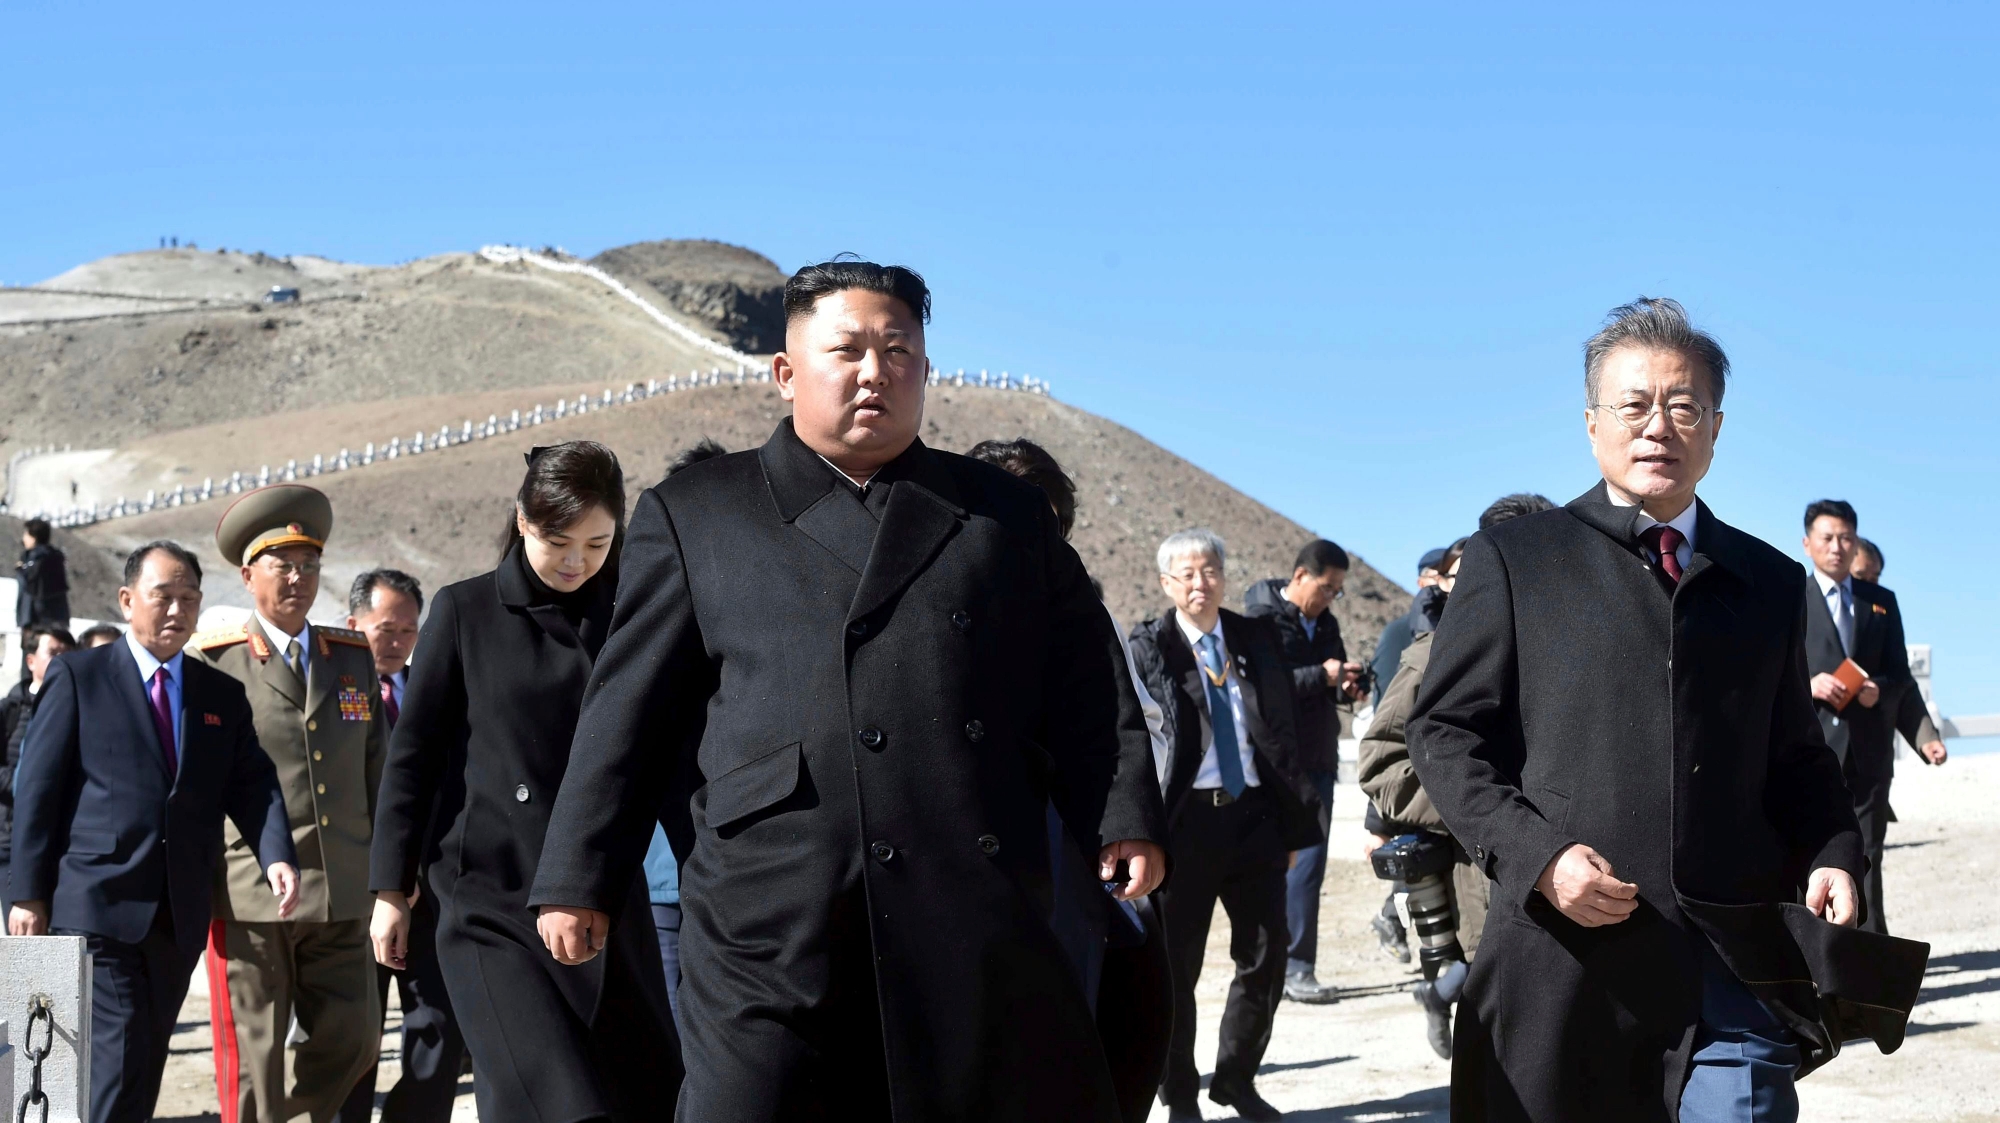 South Korean President Moon Jae-in, right, and North Korean leader Kim Jong Un, left, visit the Mount Paektu in North Korea, Thursday, Sept. 20, 2018. Moon and North Korean leader Kim Jong Un visited the picturesque and active volcano on the North Korean-Chinese border on Thursday and took a cable car to the crater lake called ÄúChonji" where they strolled together. (Pyongyang Press Corps Pool via AP) Koreas Summit Key Places